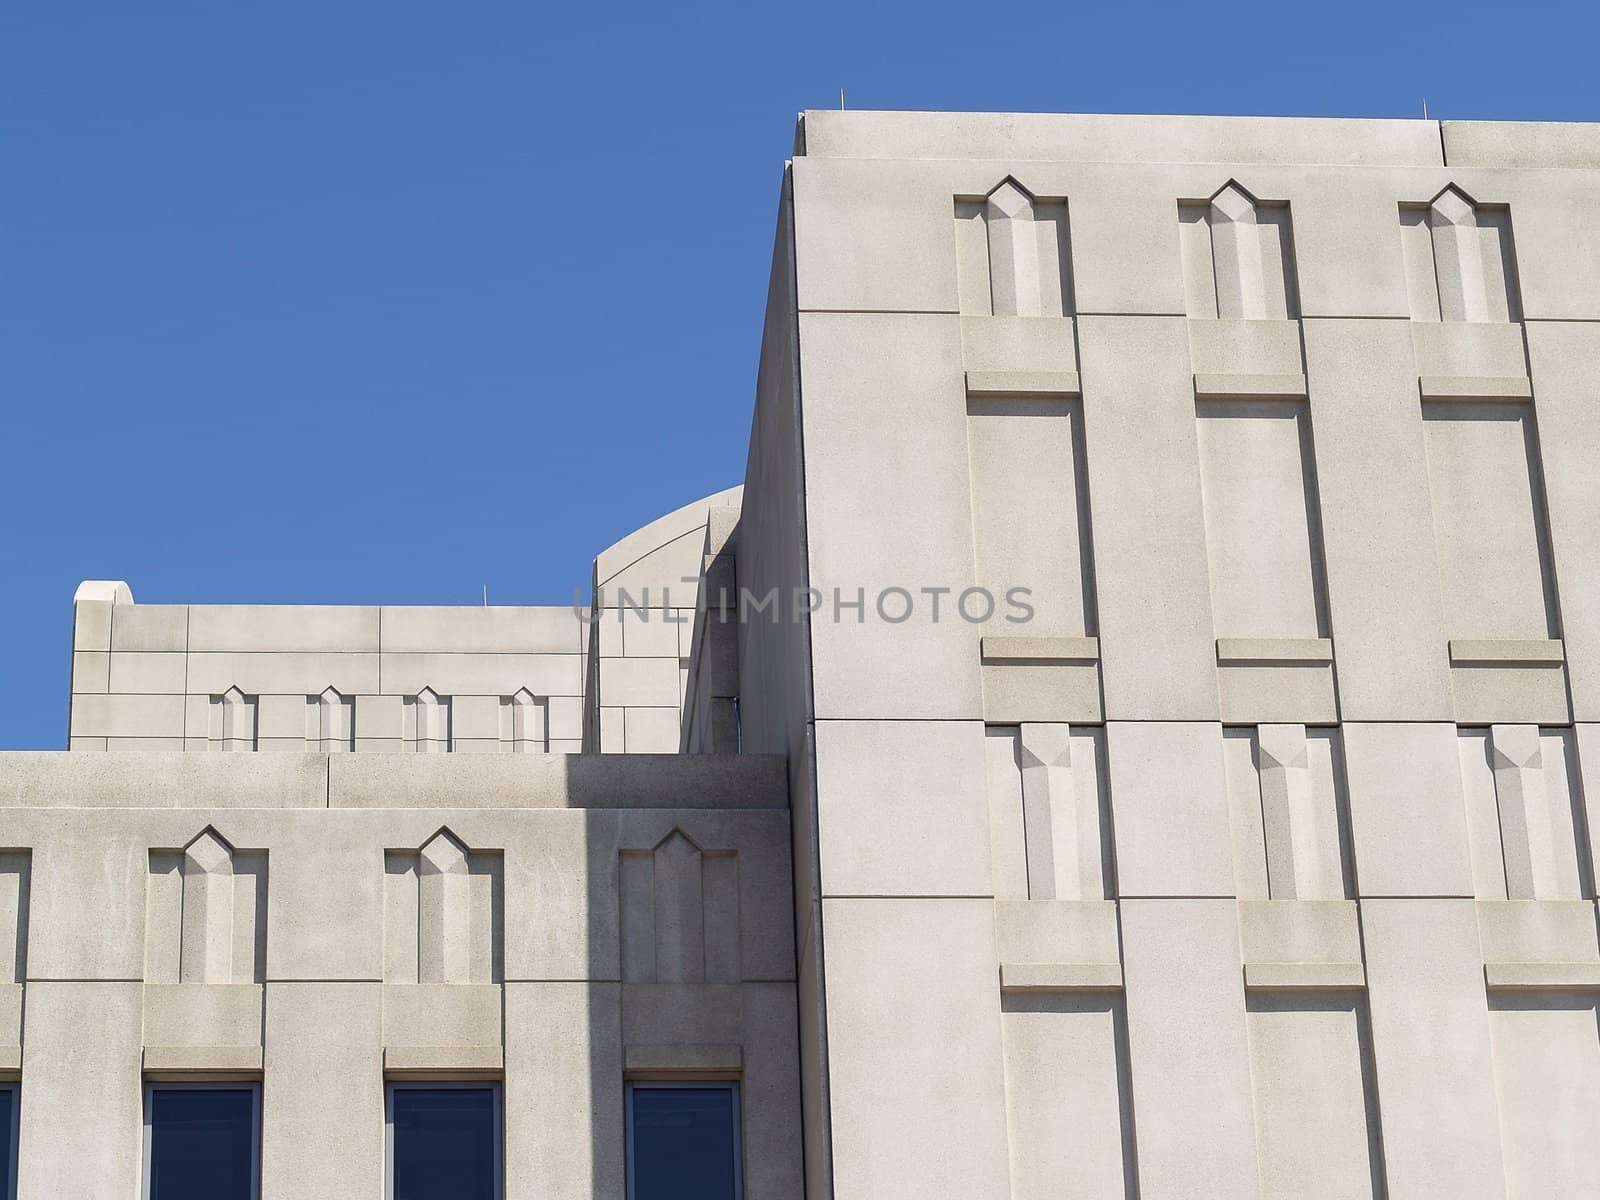 Art deco building detail with walls and windows